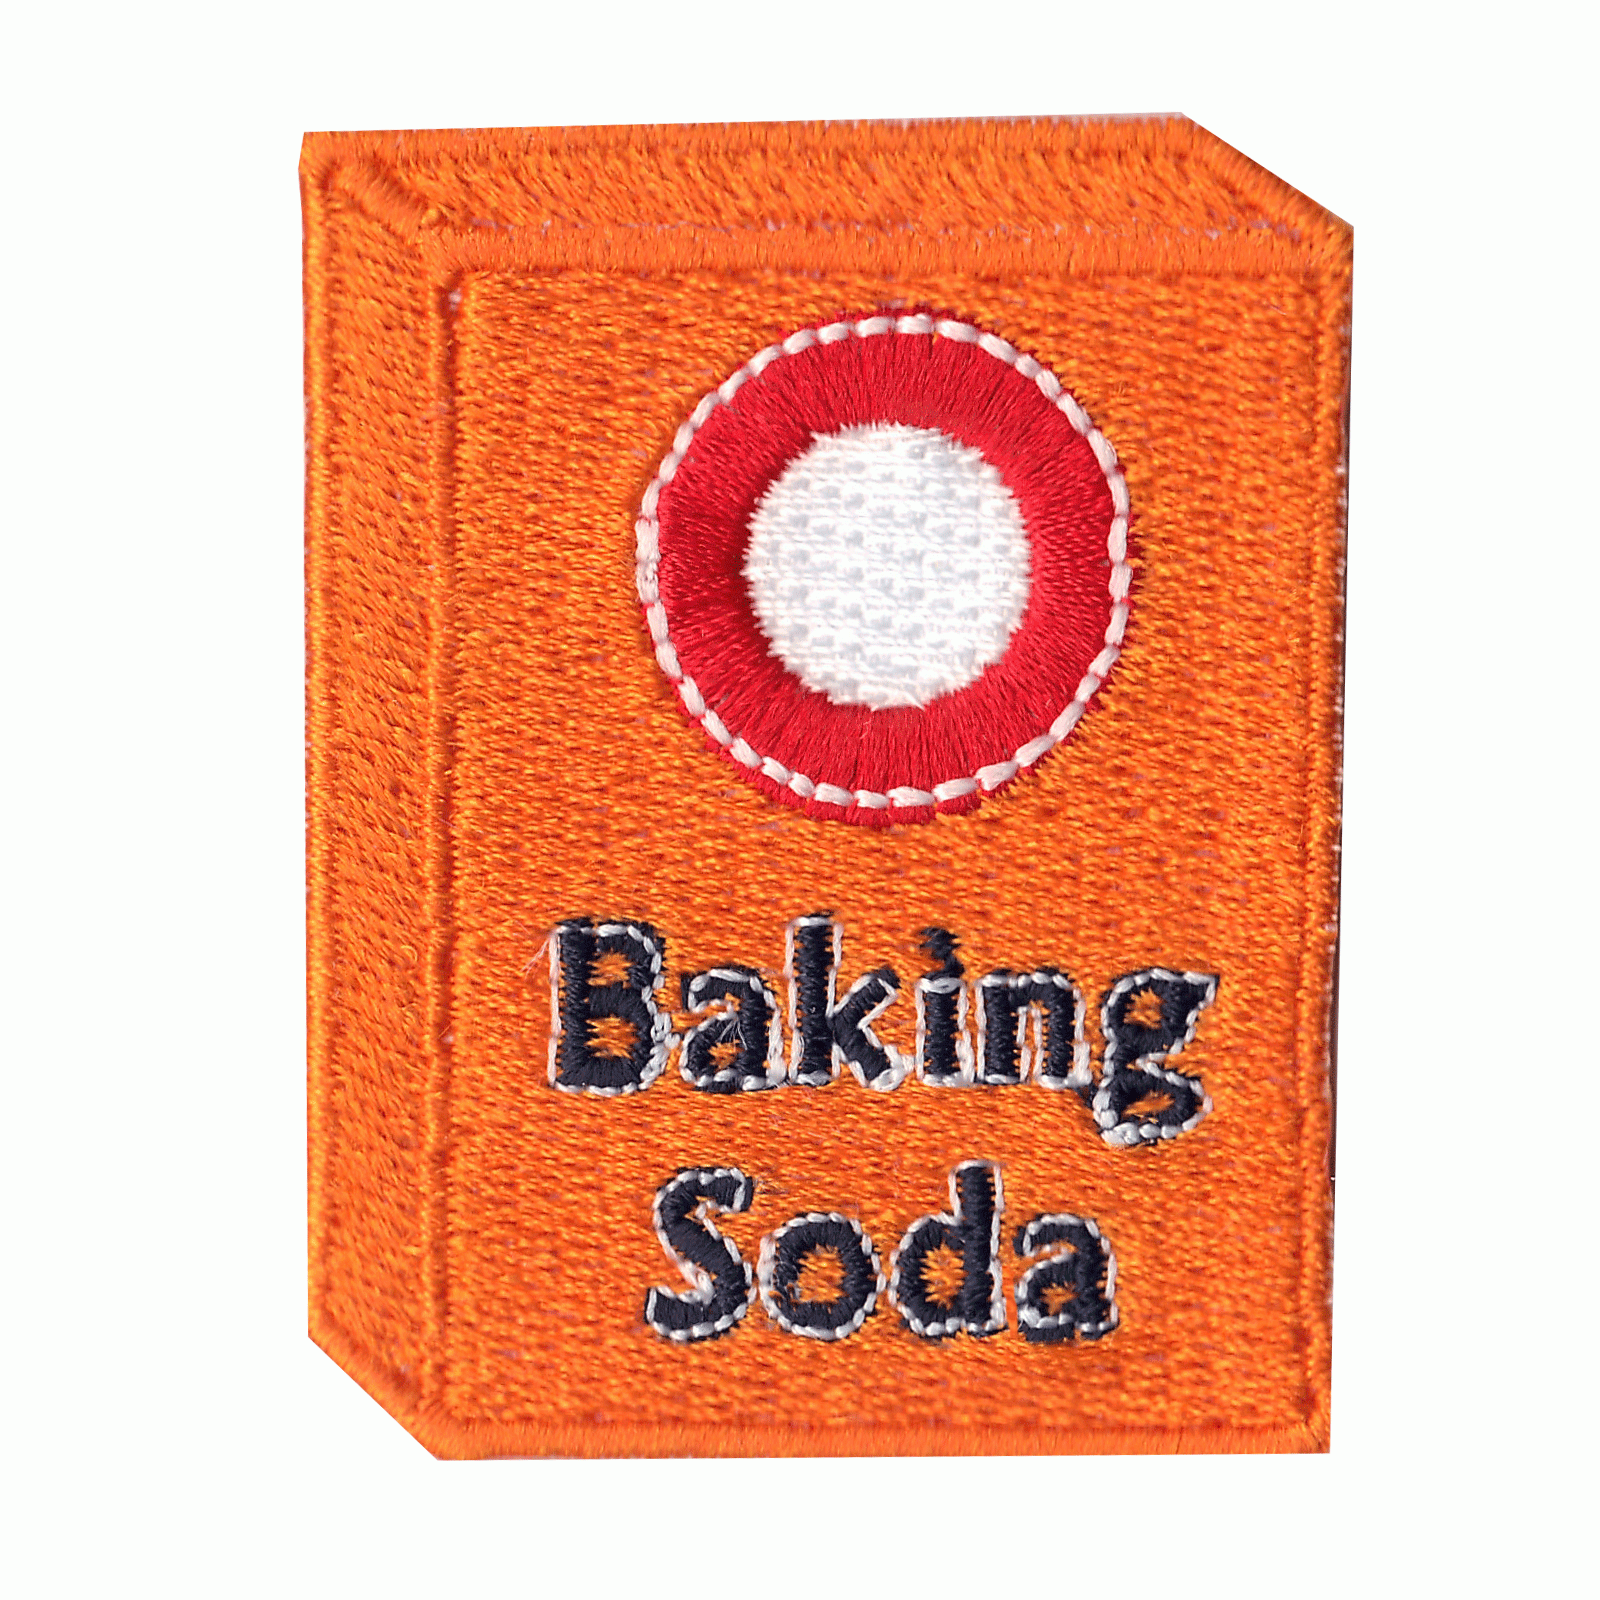 Baking Soda Box Logo Embroidered Iron on Patch 